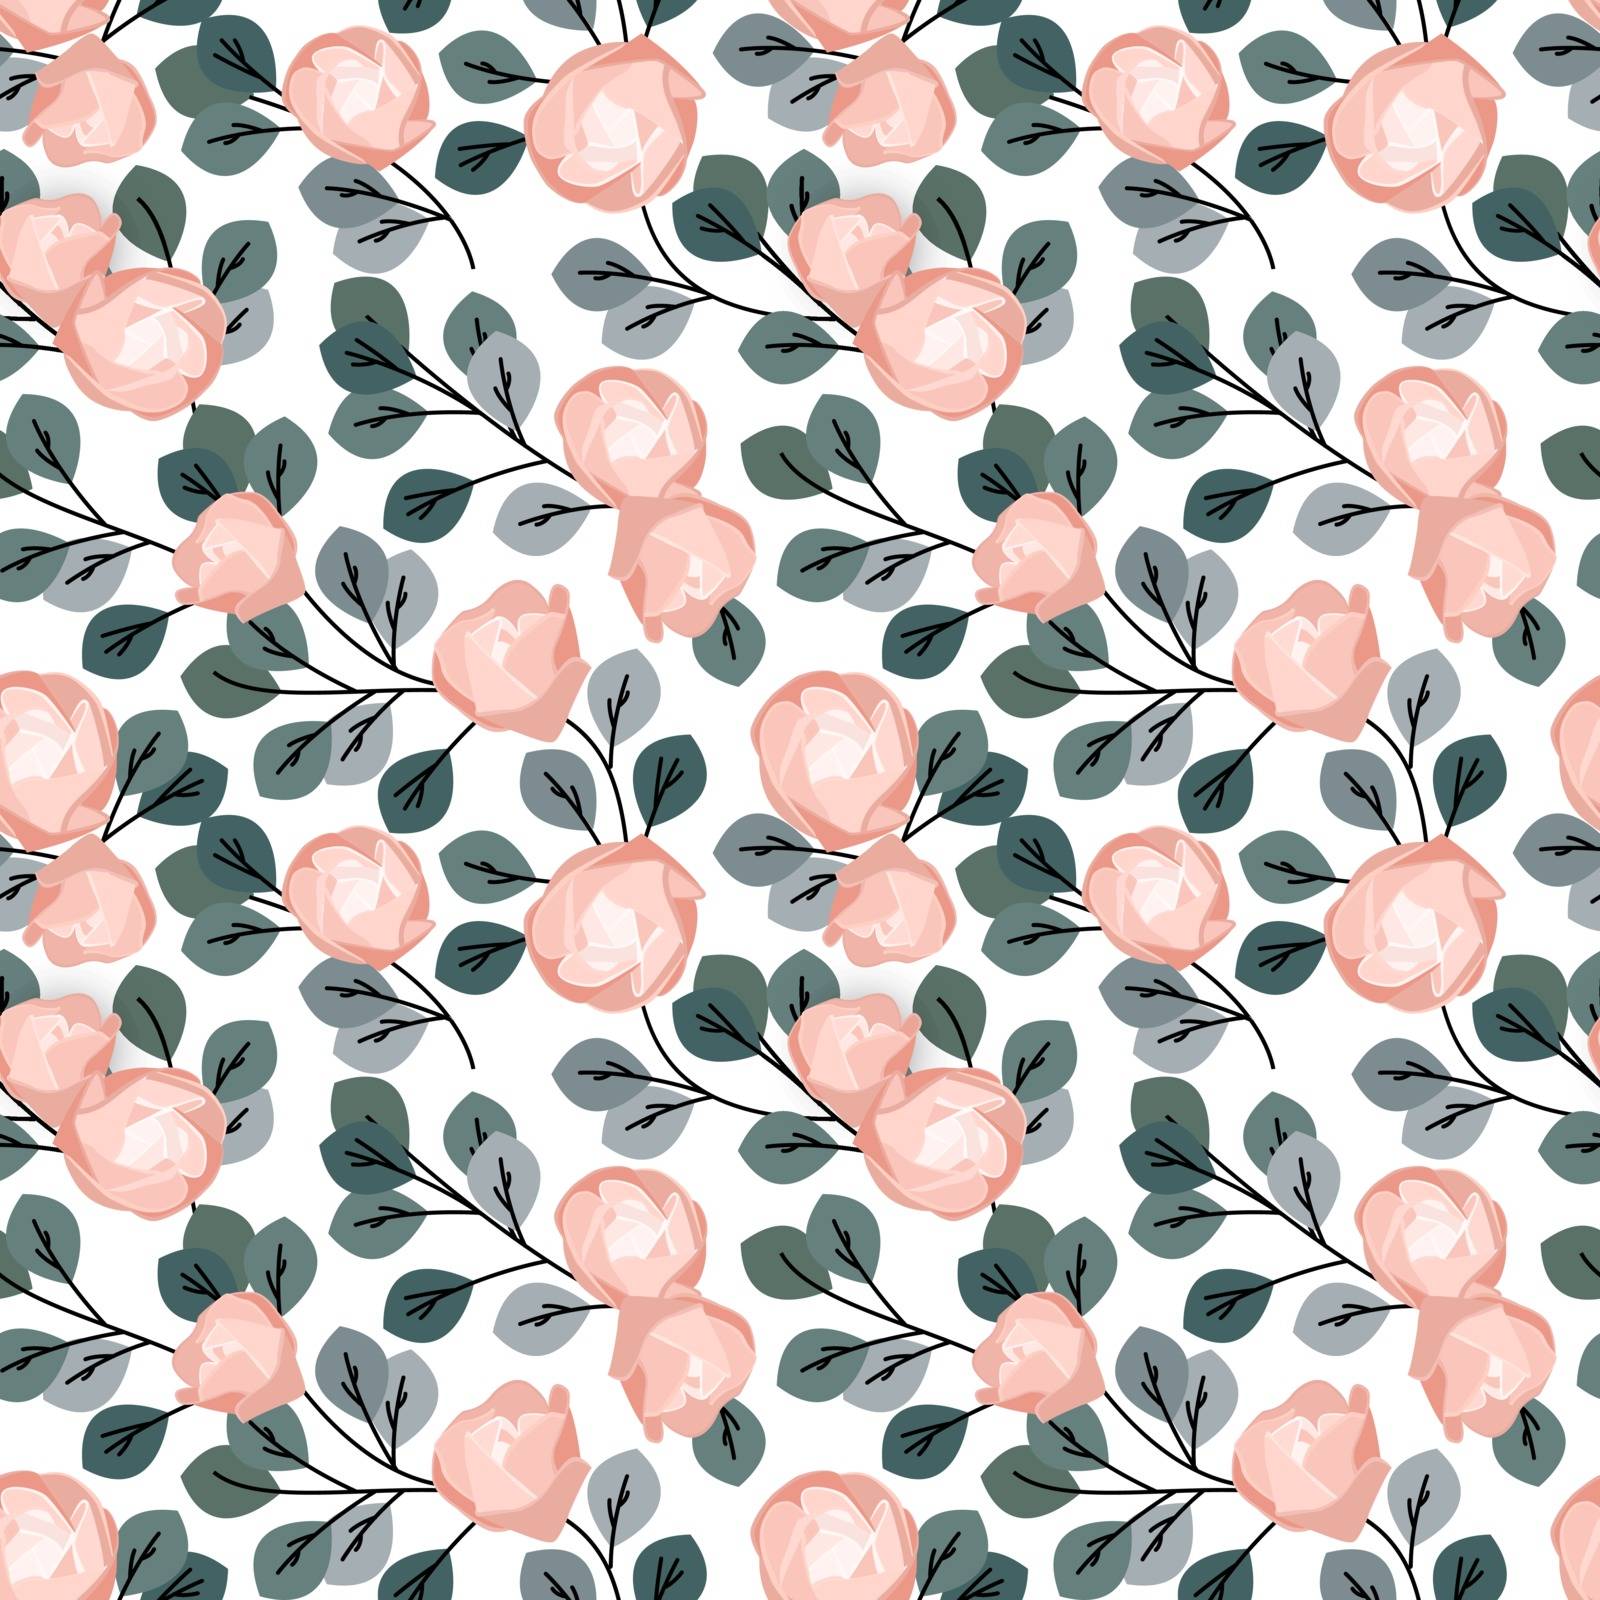 Seamless pattern of roses with leaves by odina222